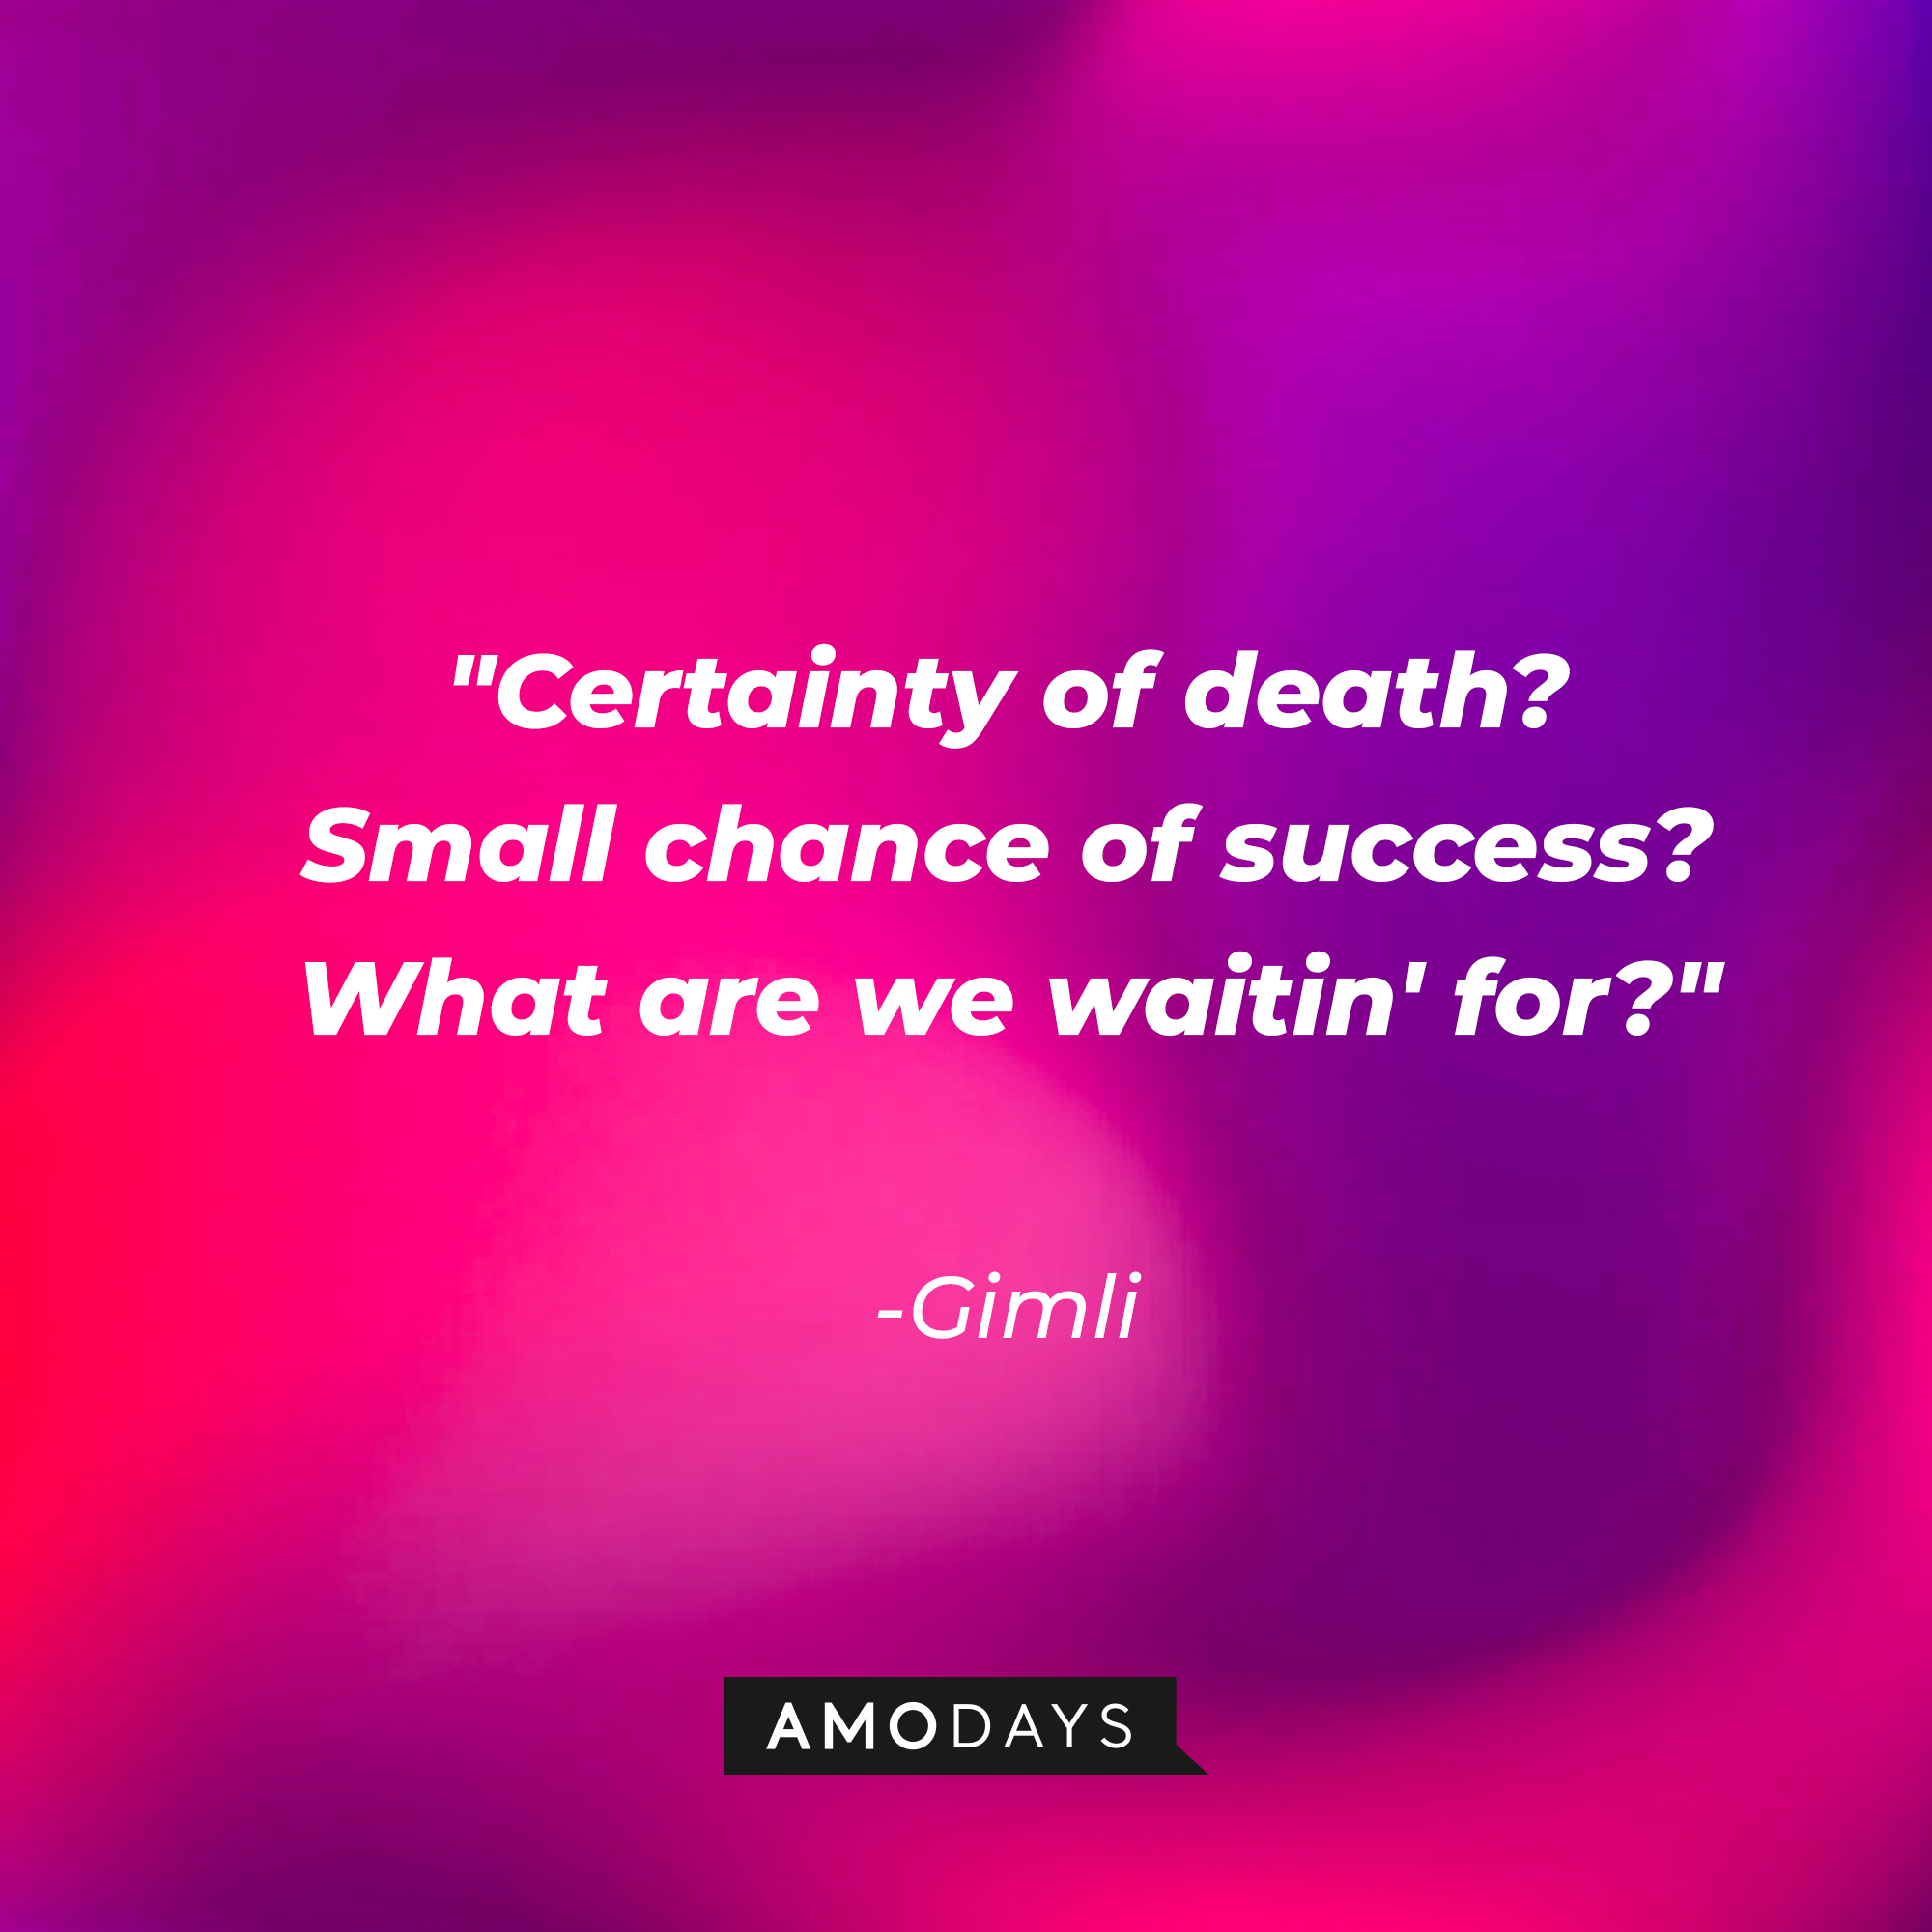 Gimli's quote: "Certainty of death? Small chance of success? What are we waitin' for?" | Source: AmoDays